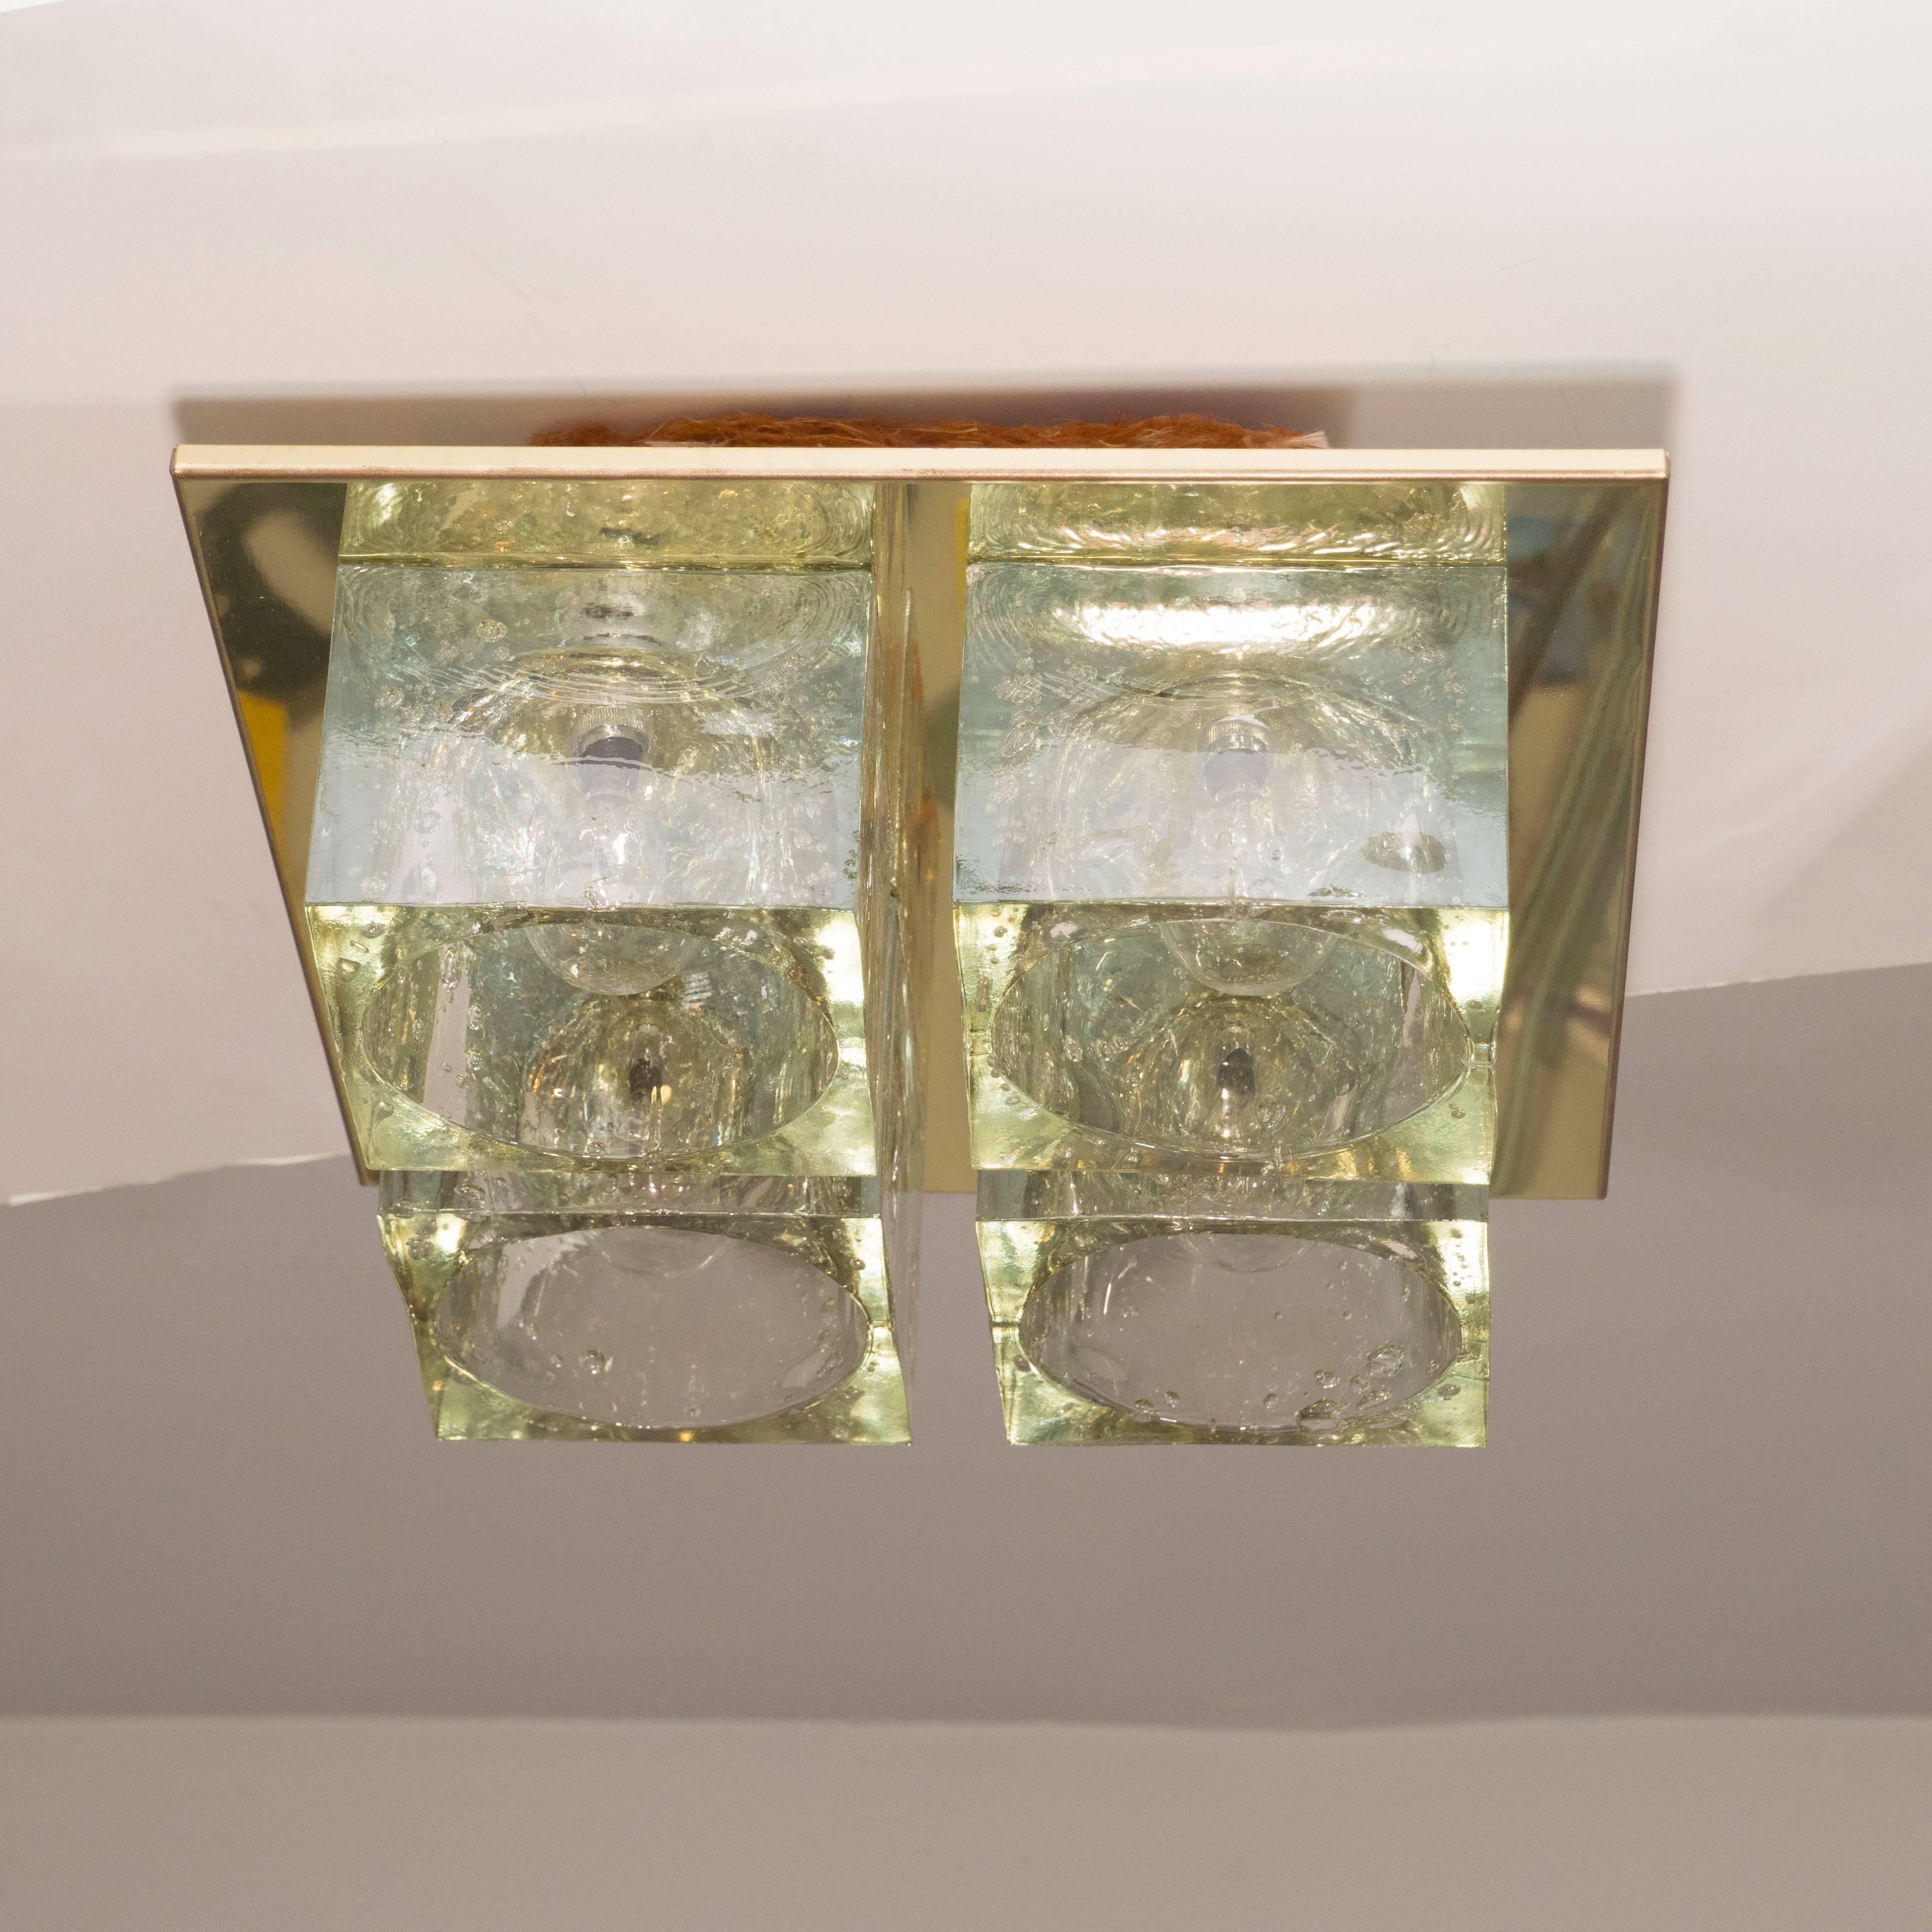 This brilliant Mid-Century Modern flush mount chandelier was realized by the esteemed Italian glass studio Sciolari, circa 1970. It features four thick translucent glass cubed shades with inset bulbs attached to a close fitting brass backplate. This